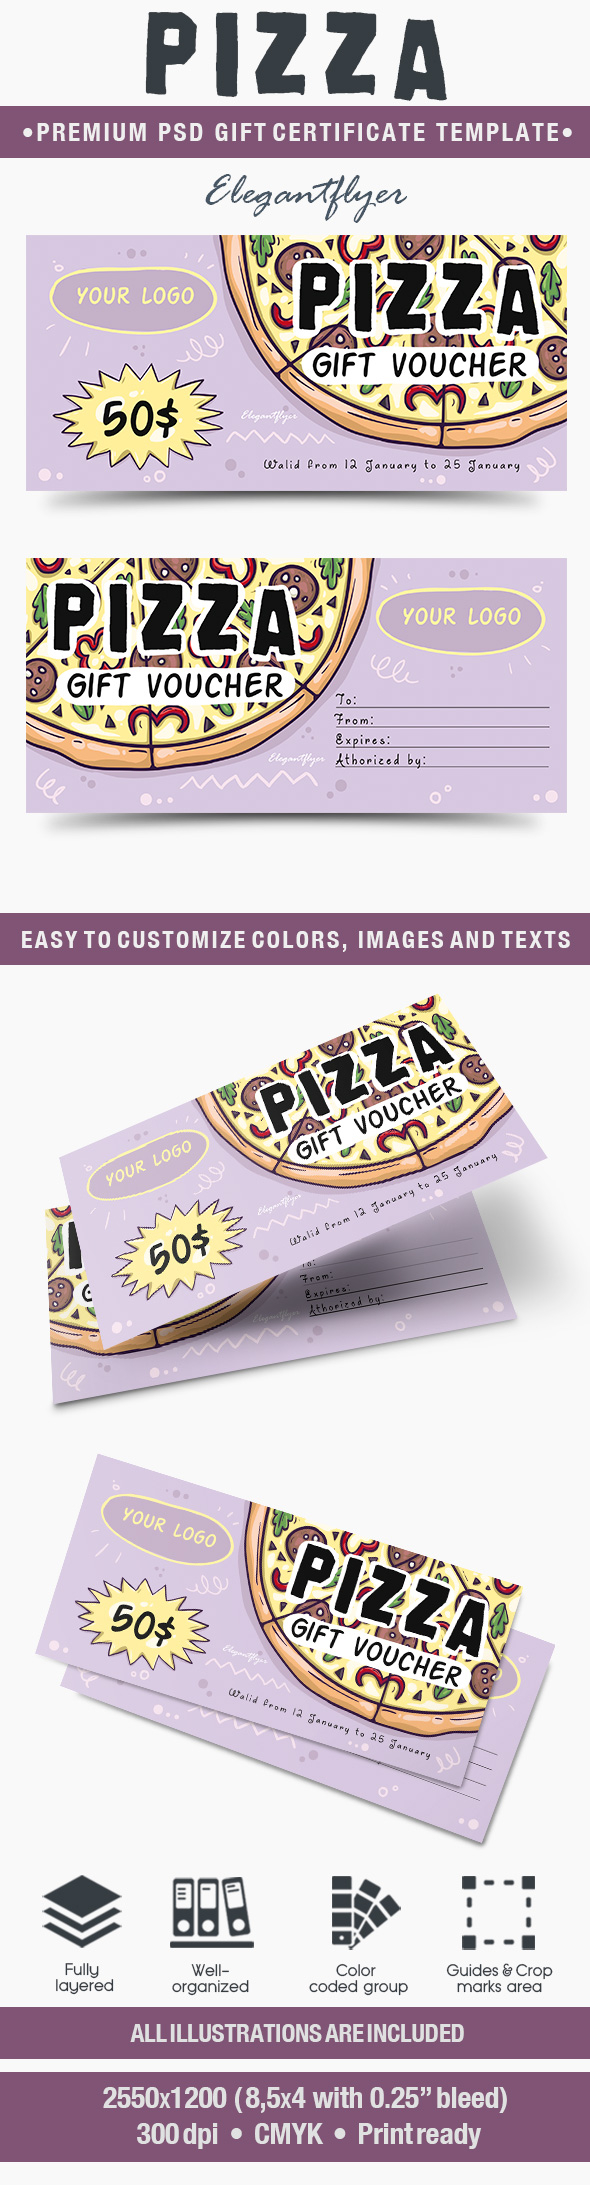 Pizza – Premium Gift Certificate PSD Template  by ElegantFlyer Regarding Pizza Gift Certificate Template